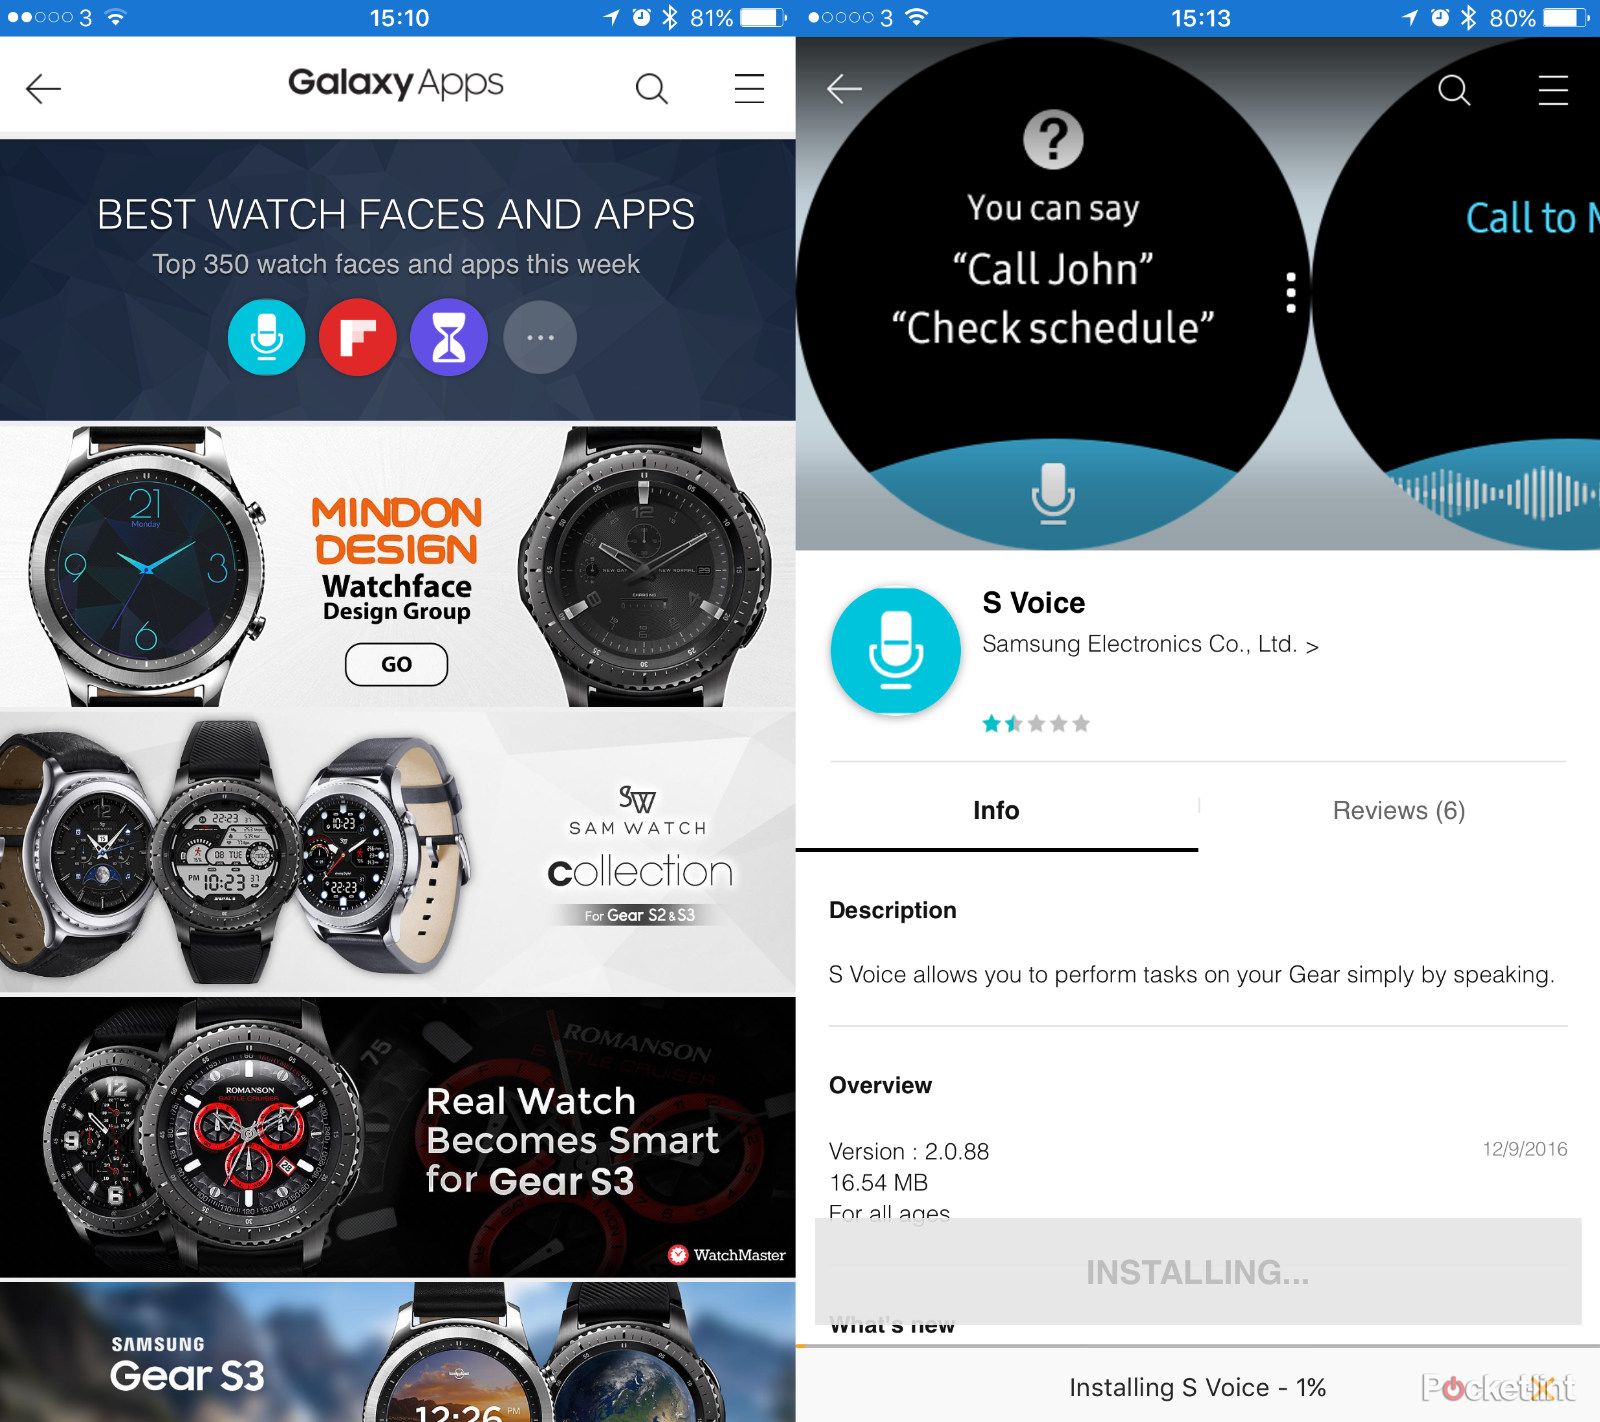 samsung gear s3 and gear s2 now connect to iphone here s how it works image 5